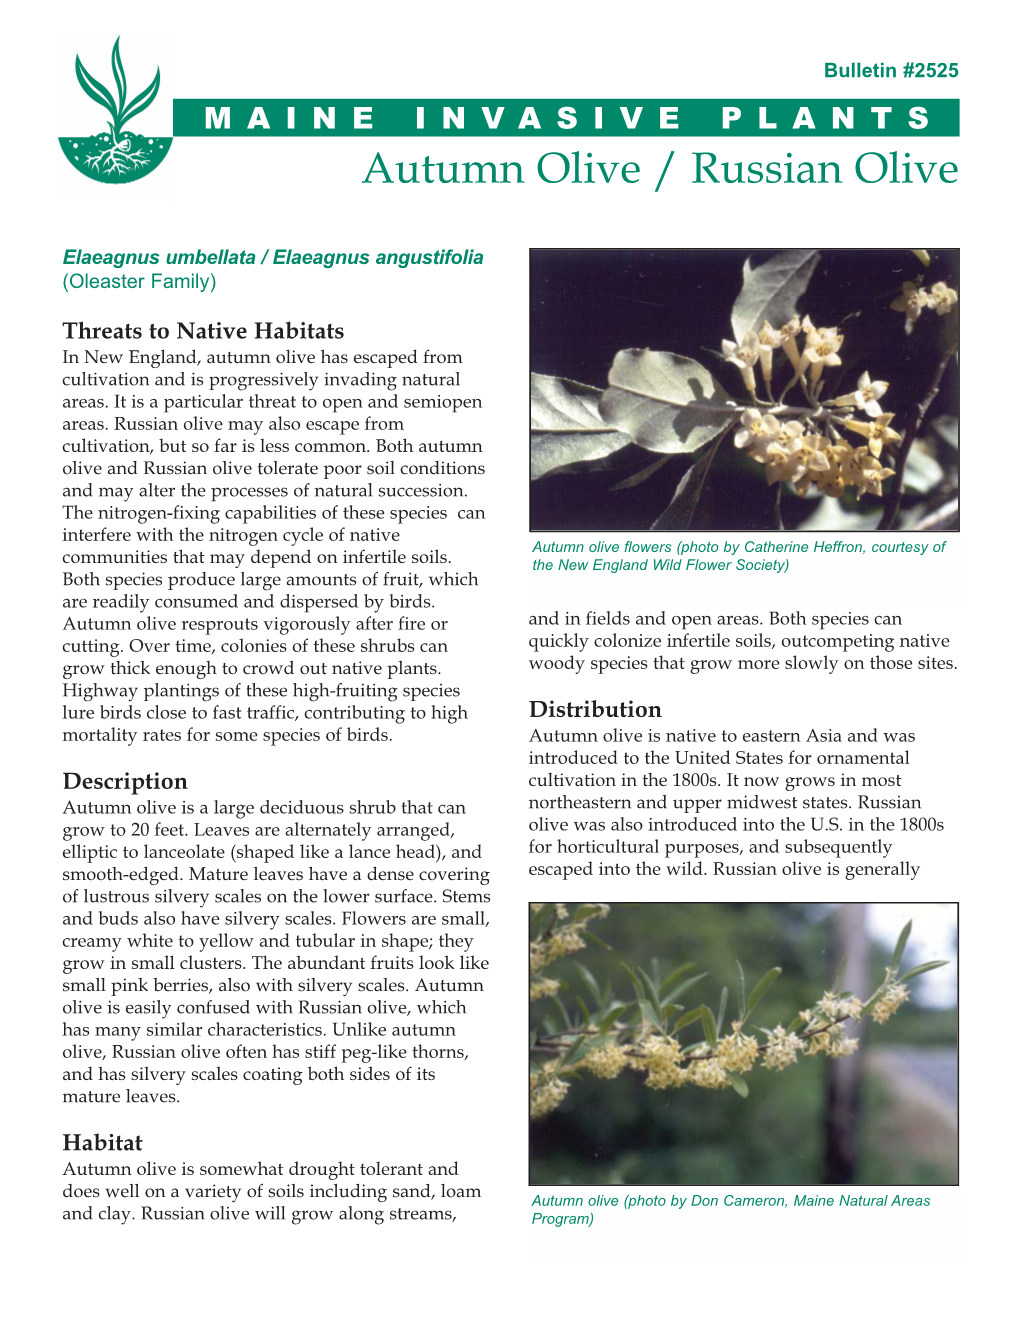 Autumn Olive / Russian Olive